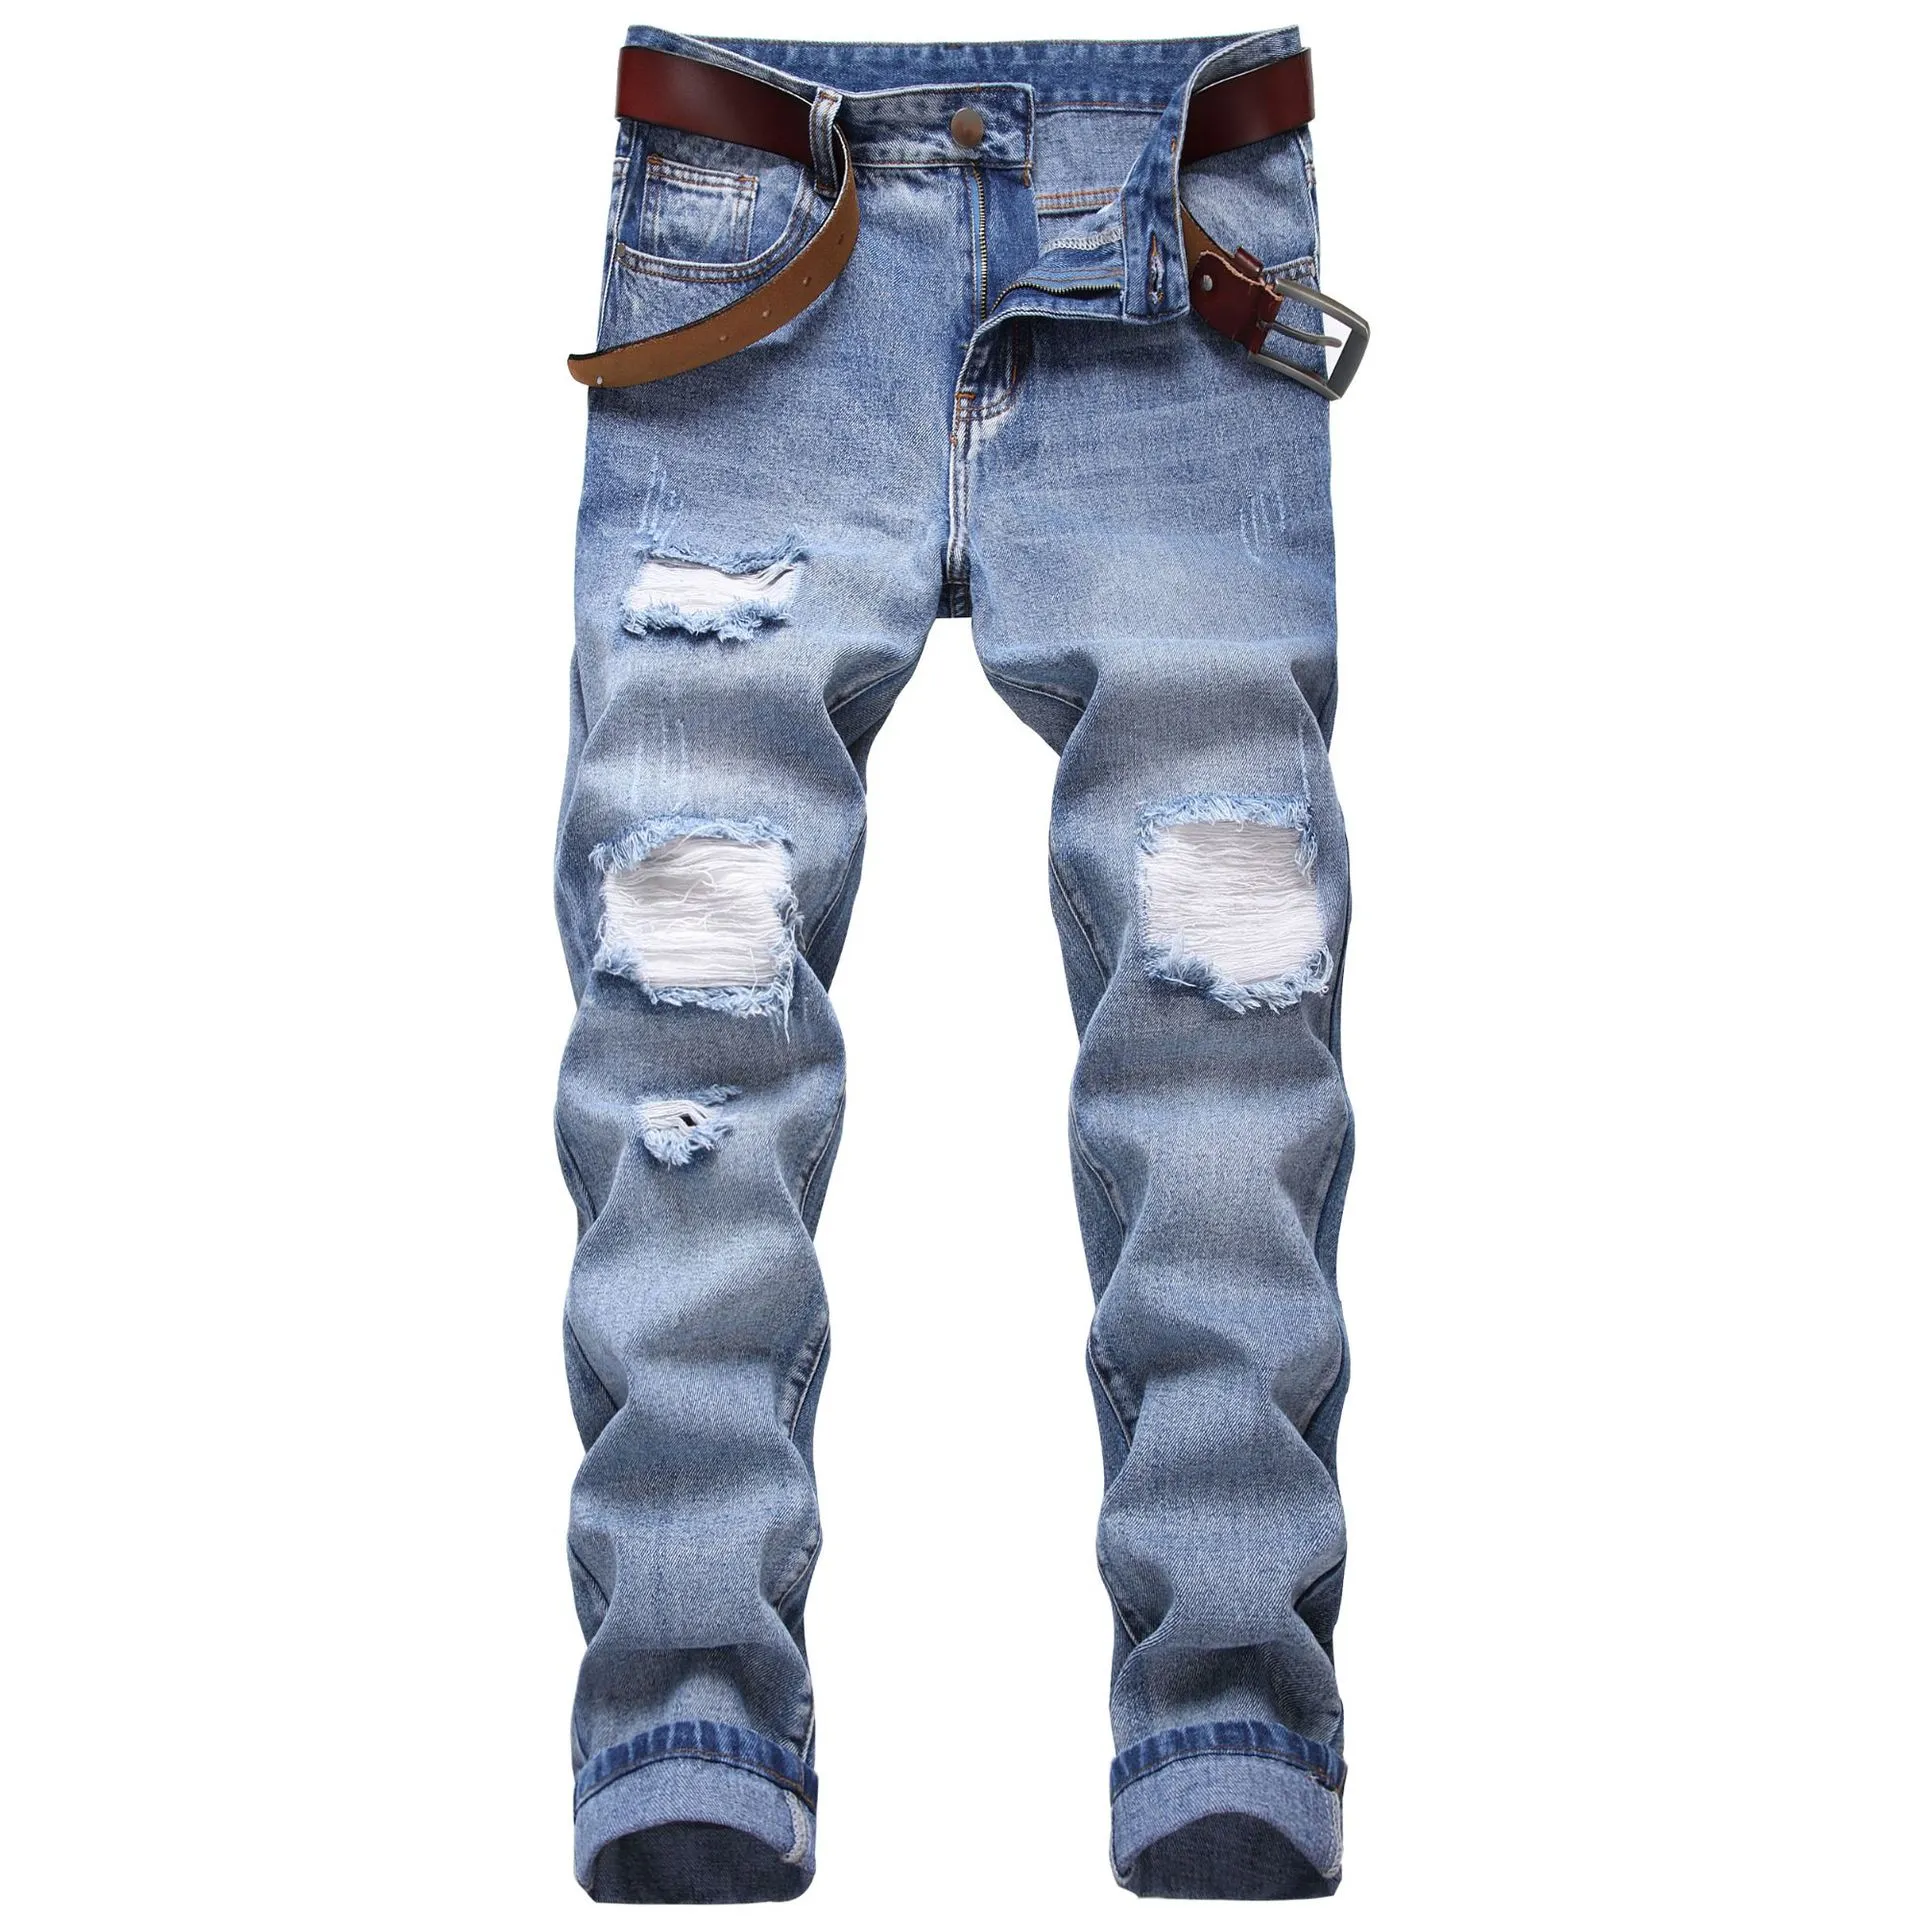 Men's Jeans Street Style Mens Brand Washed Ripped Denim Pants With Holes Strechy Homme Skinny